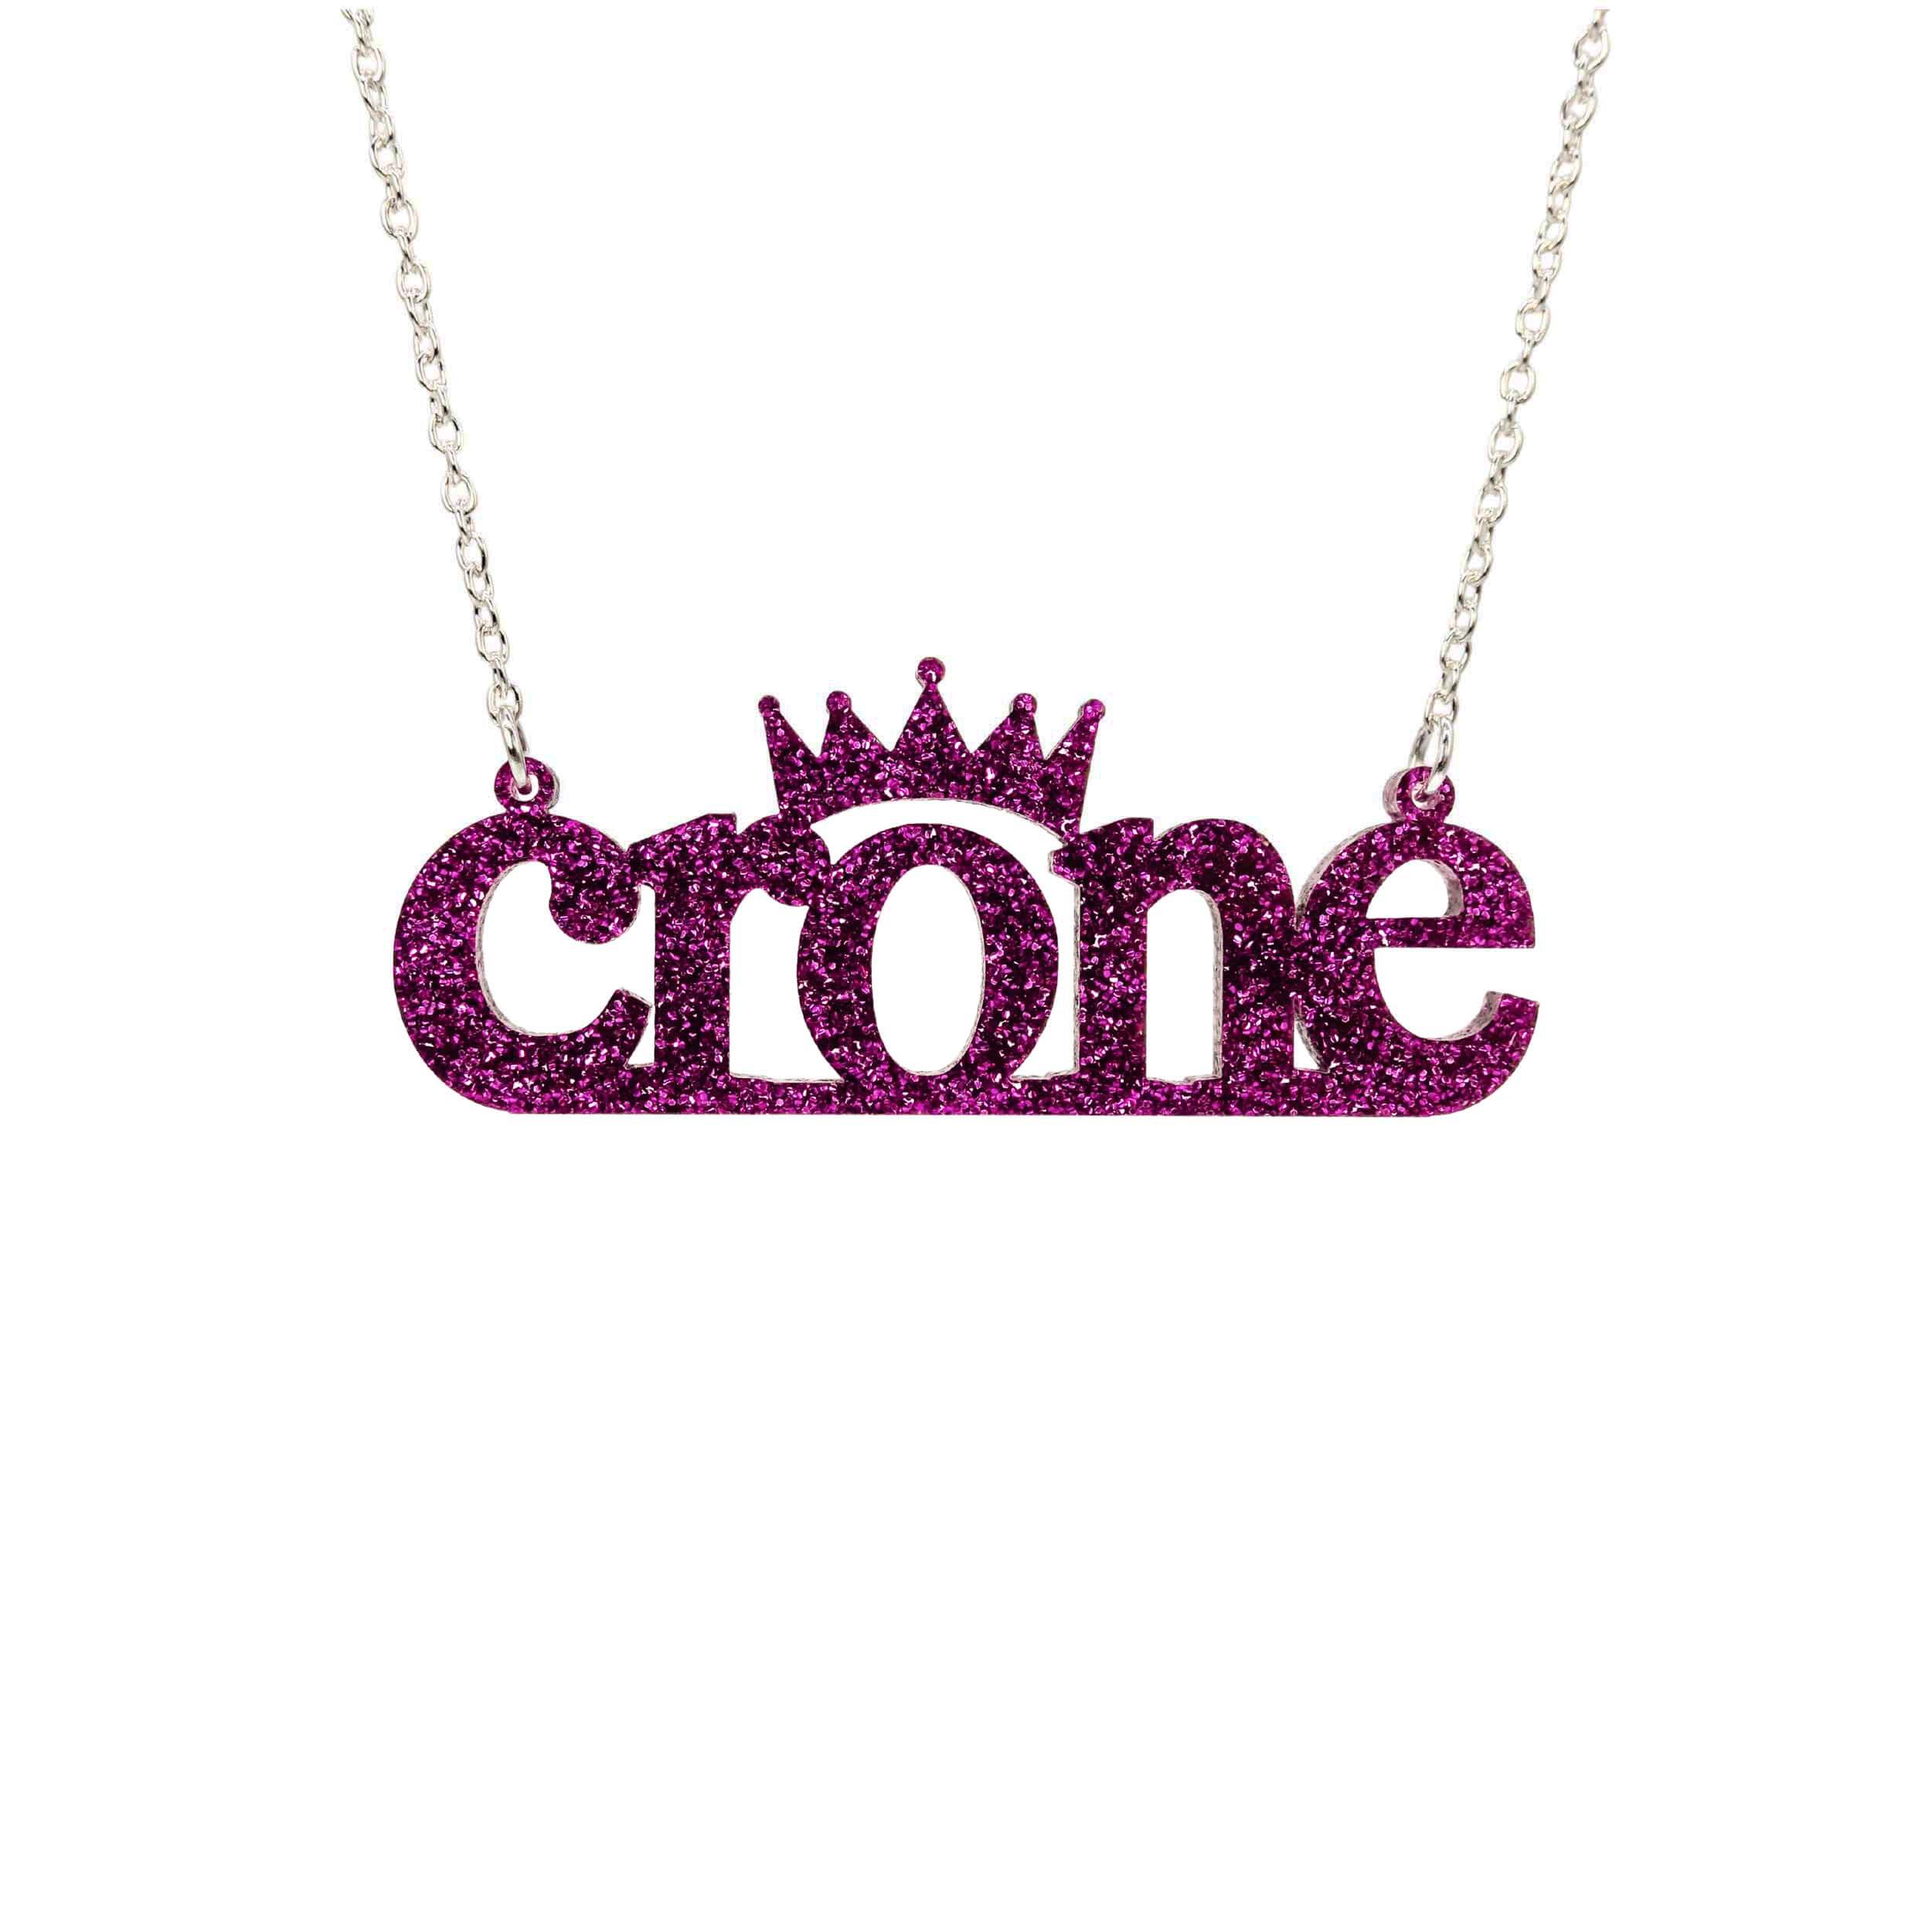 Crone necklace in purple glitter, shown hanging against a white background. 